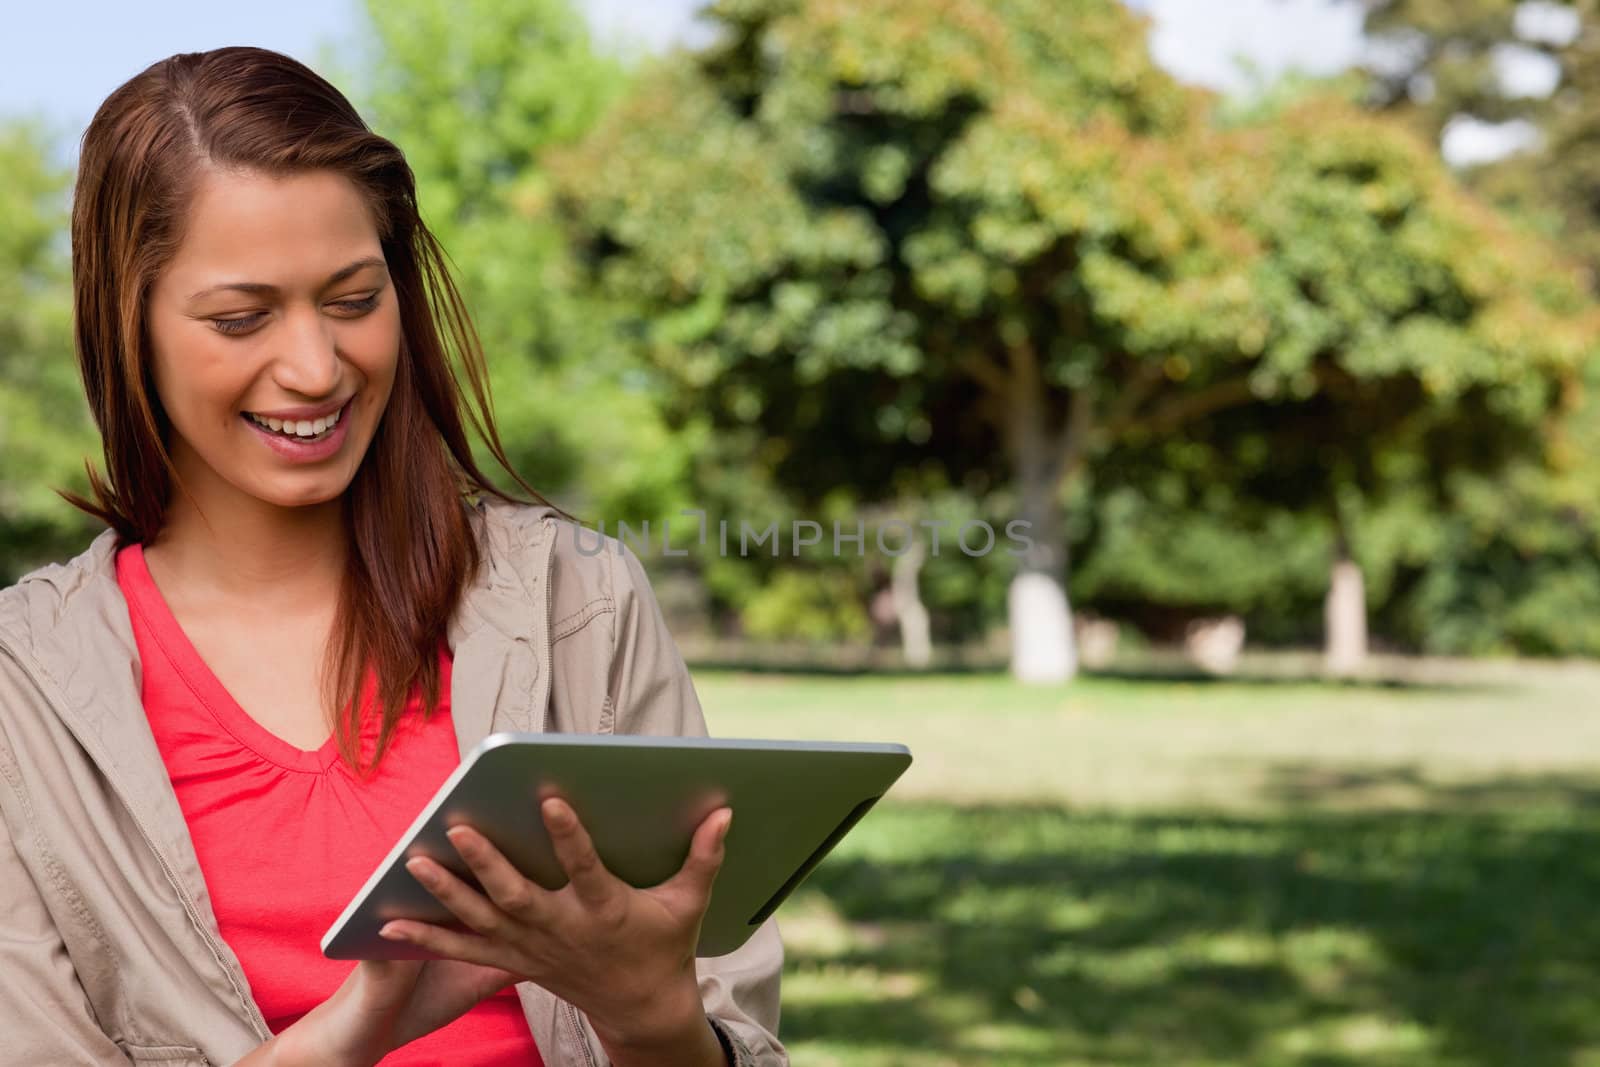 Young woman smiling enthusiastically while using a tablet in a sunny grassland area